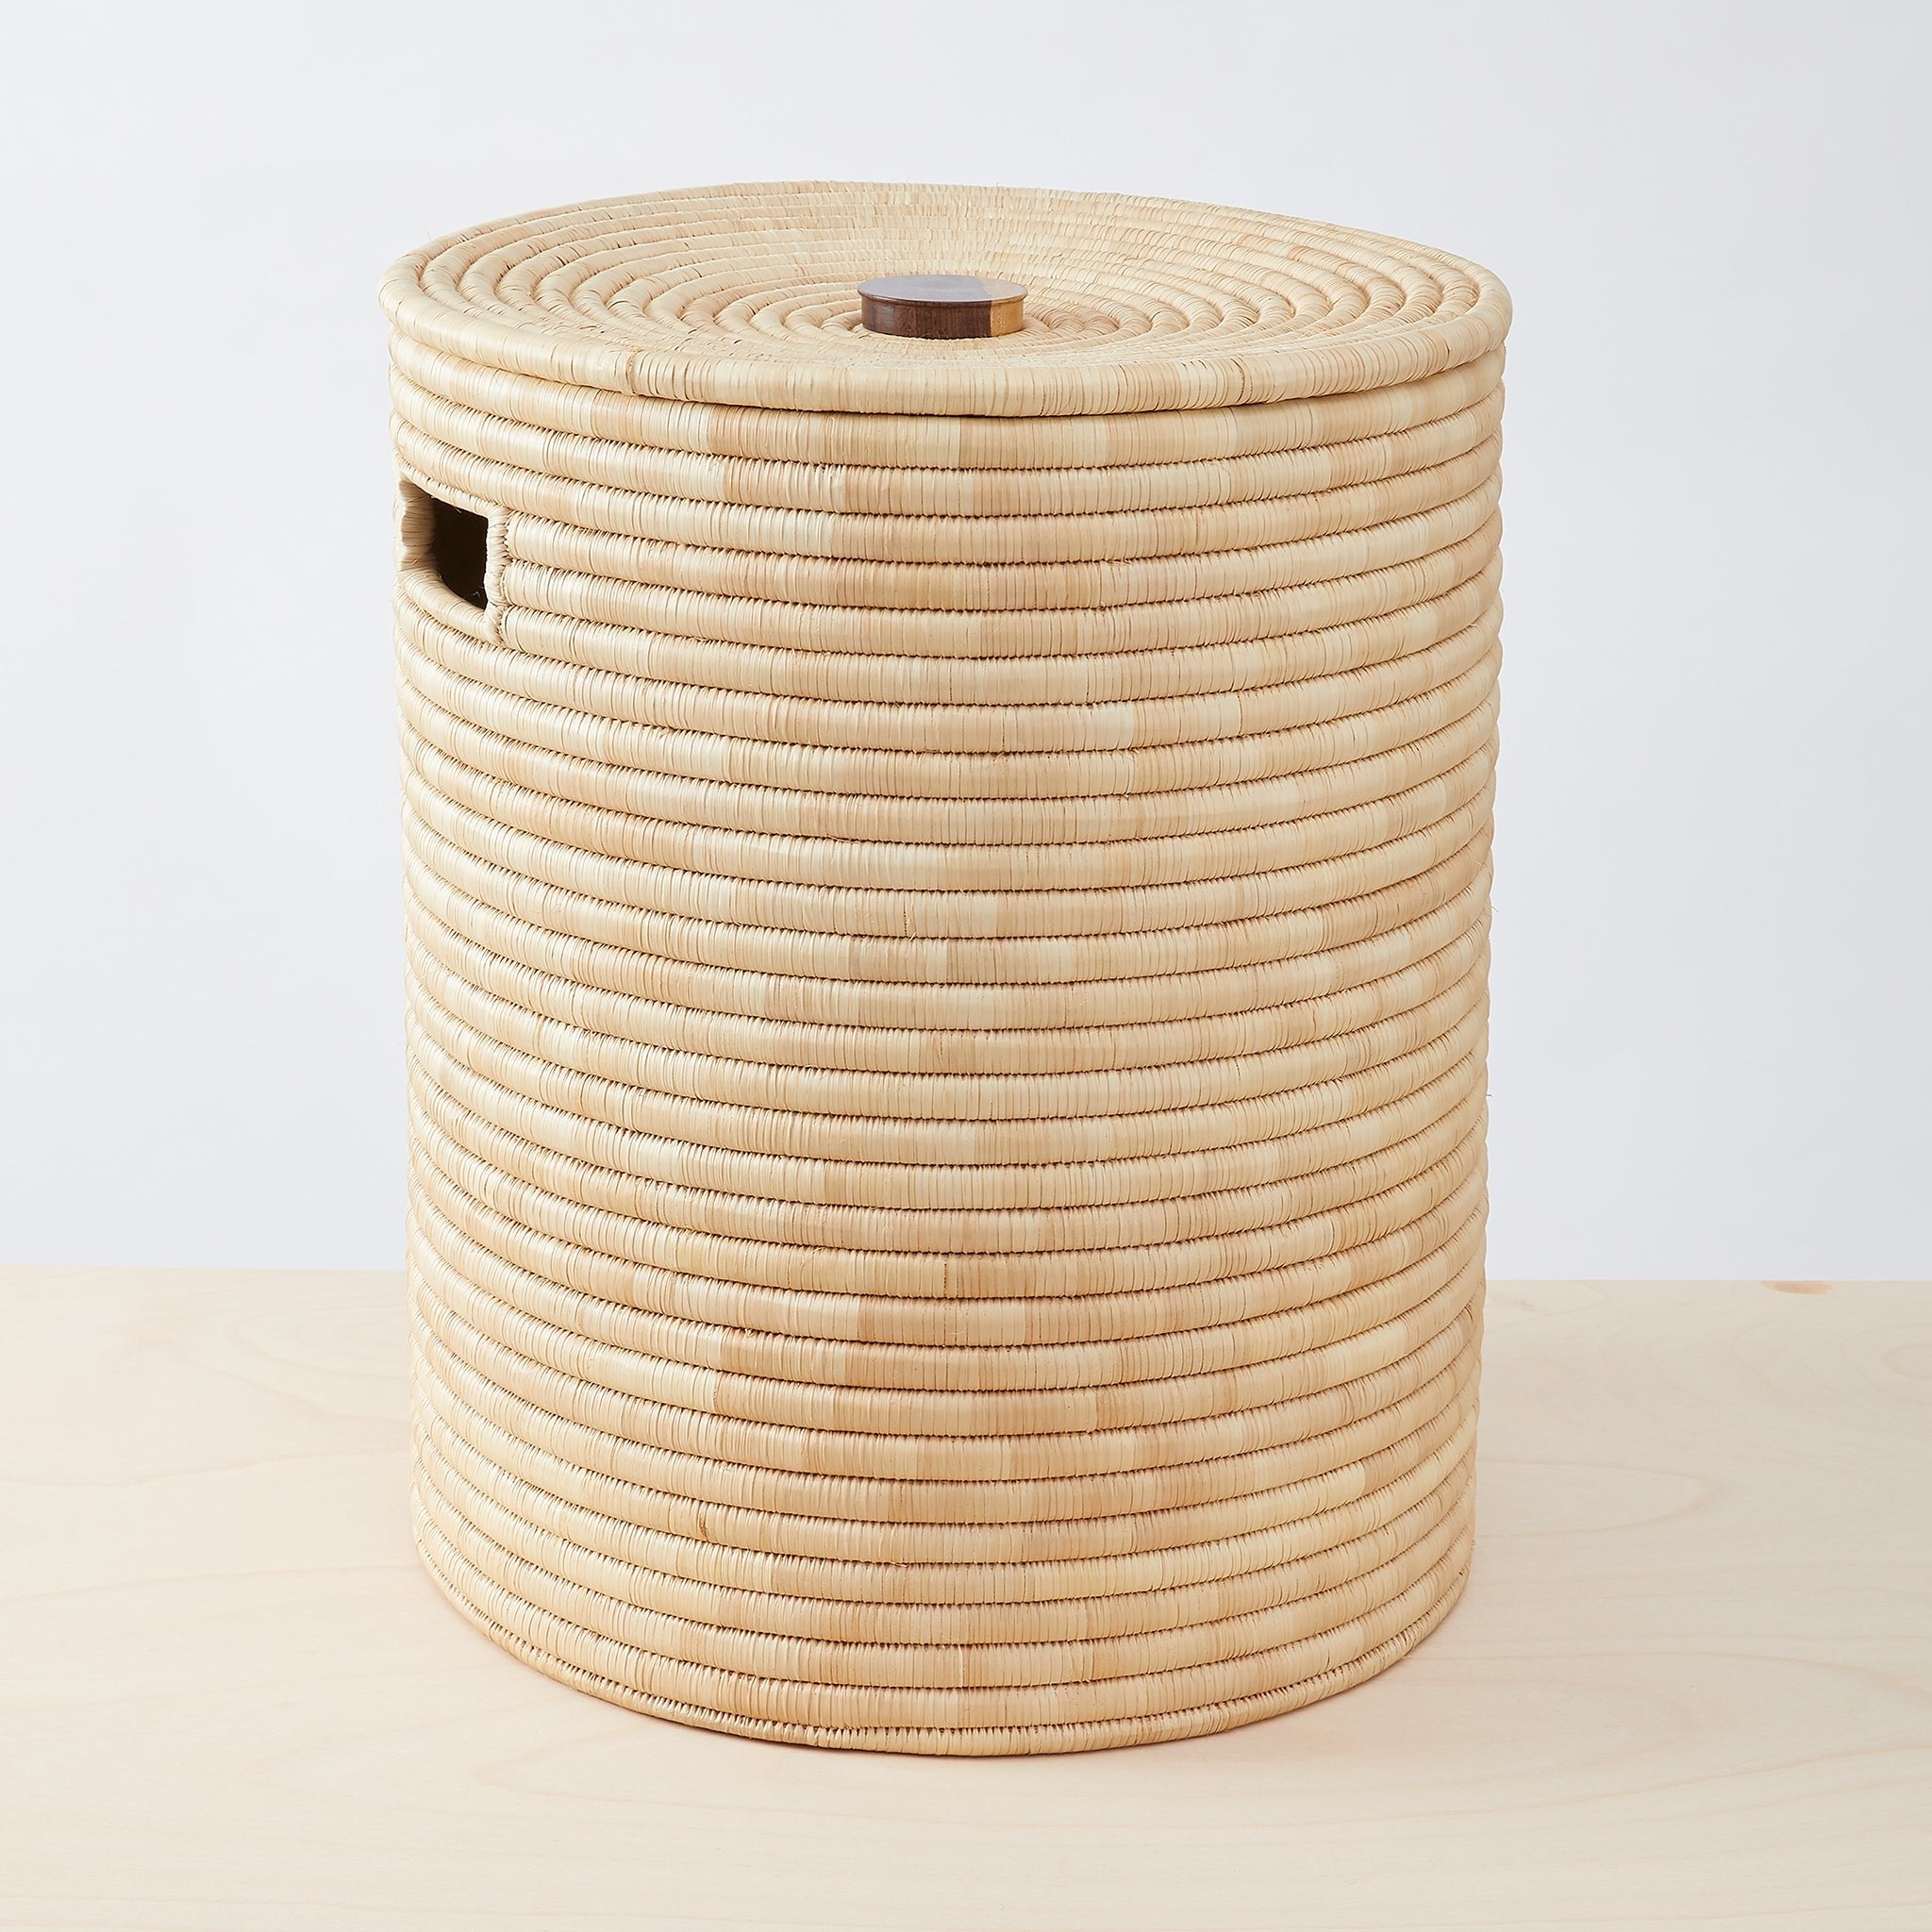 Dengu large woven laundry basket with lid - By Native